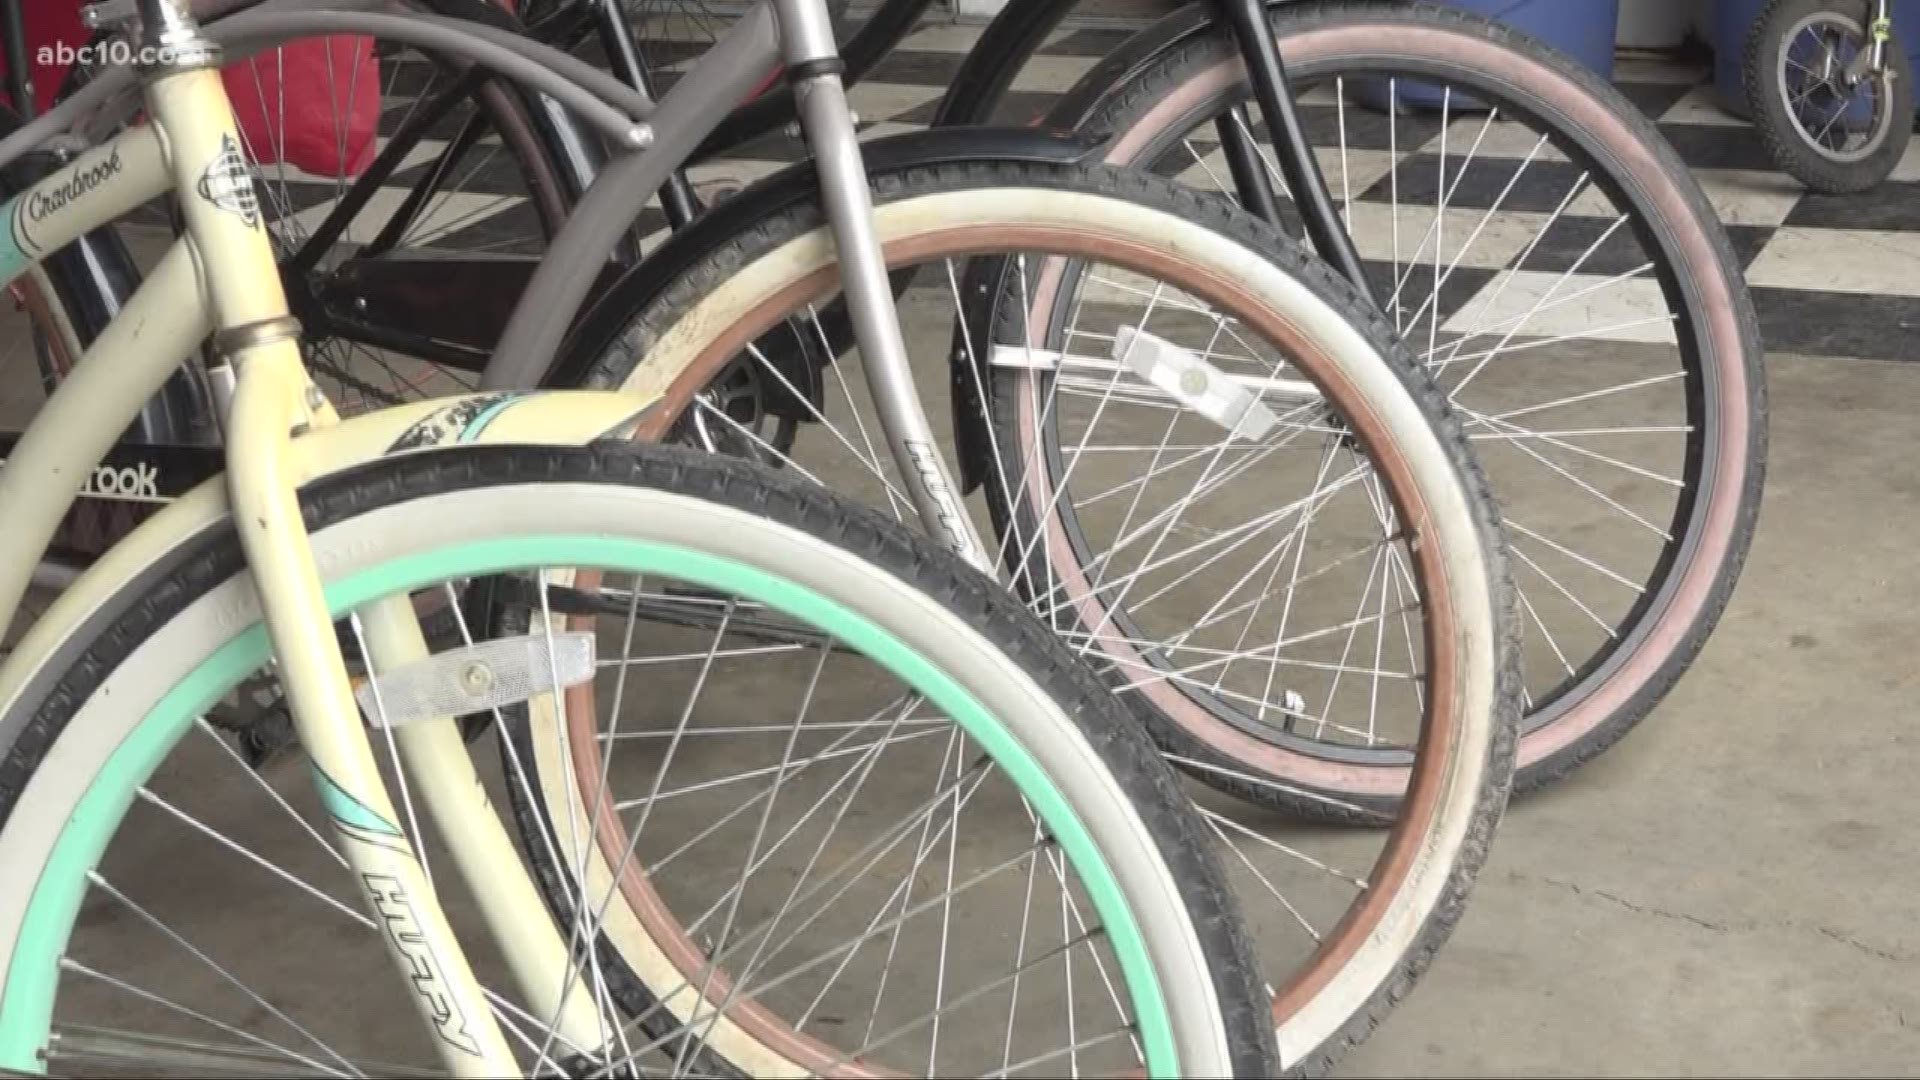 For the second year, a local car shop owner is refurbishing old donated bikes to give to kids at a free giveaway on Dec. 14.